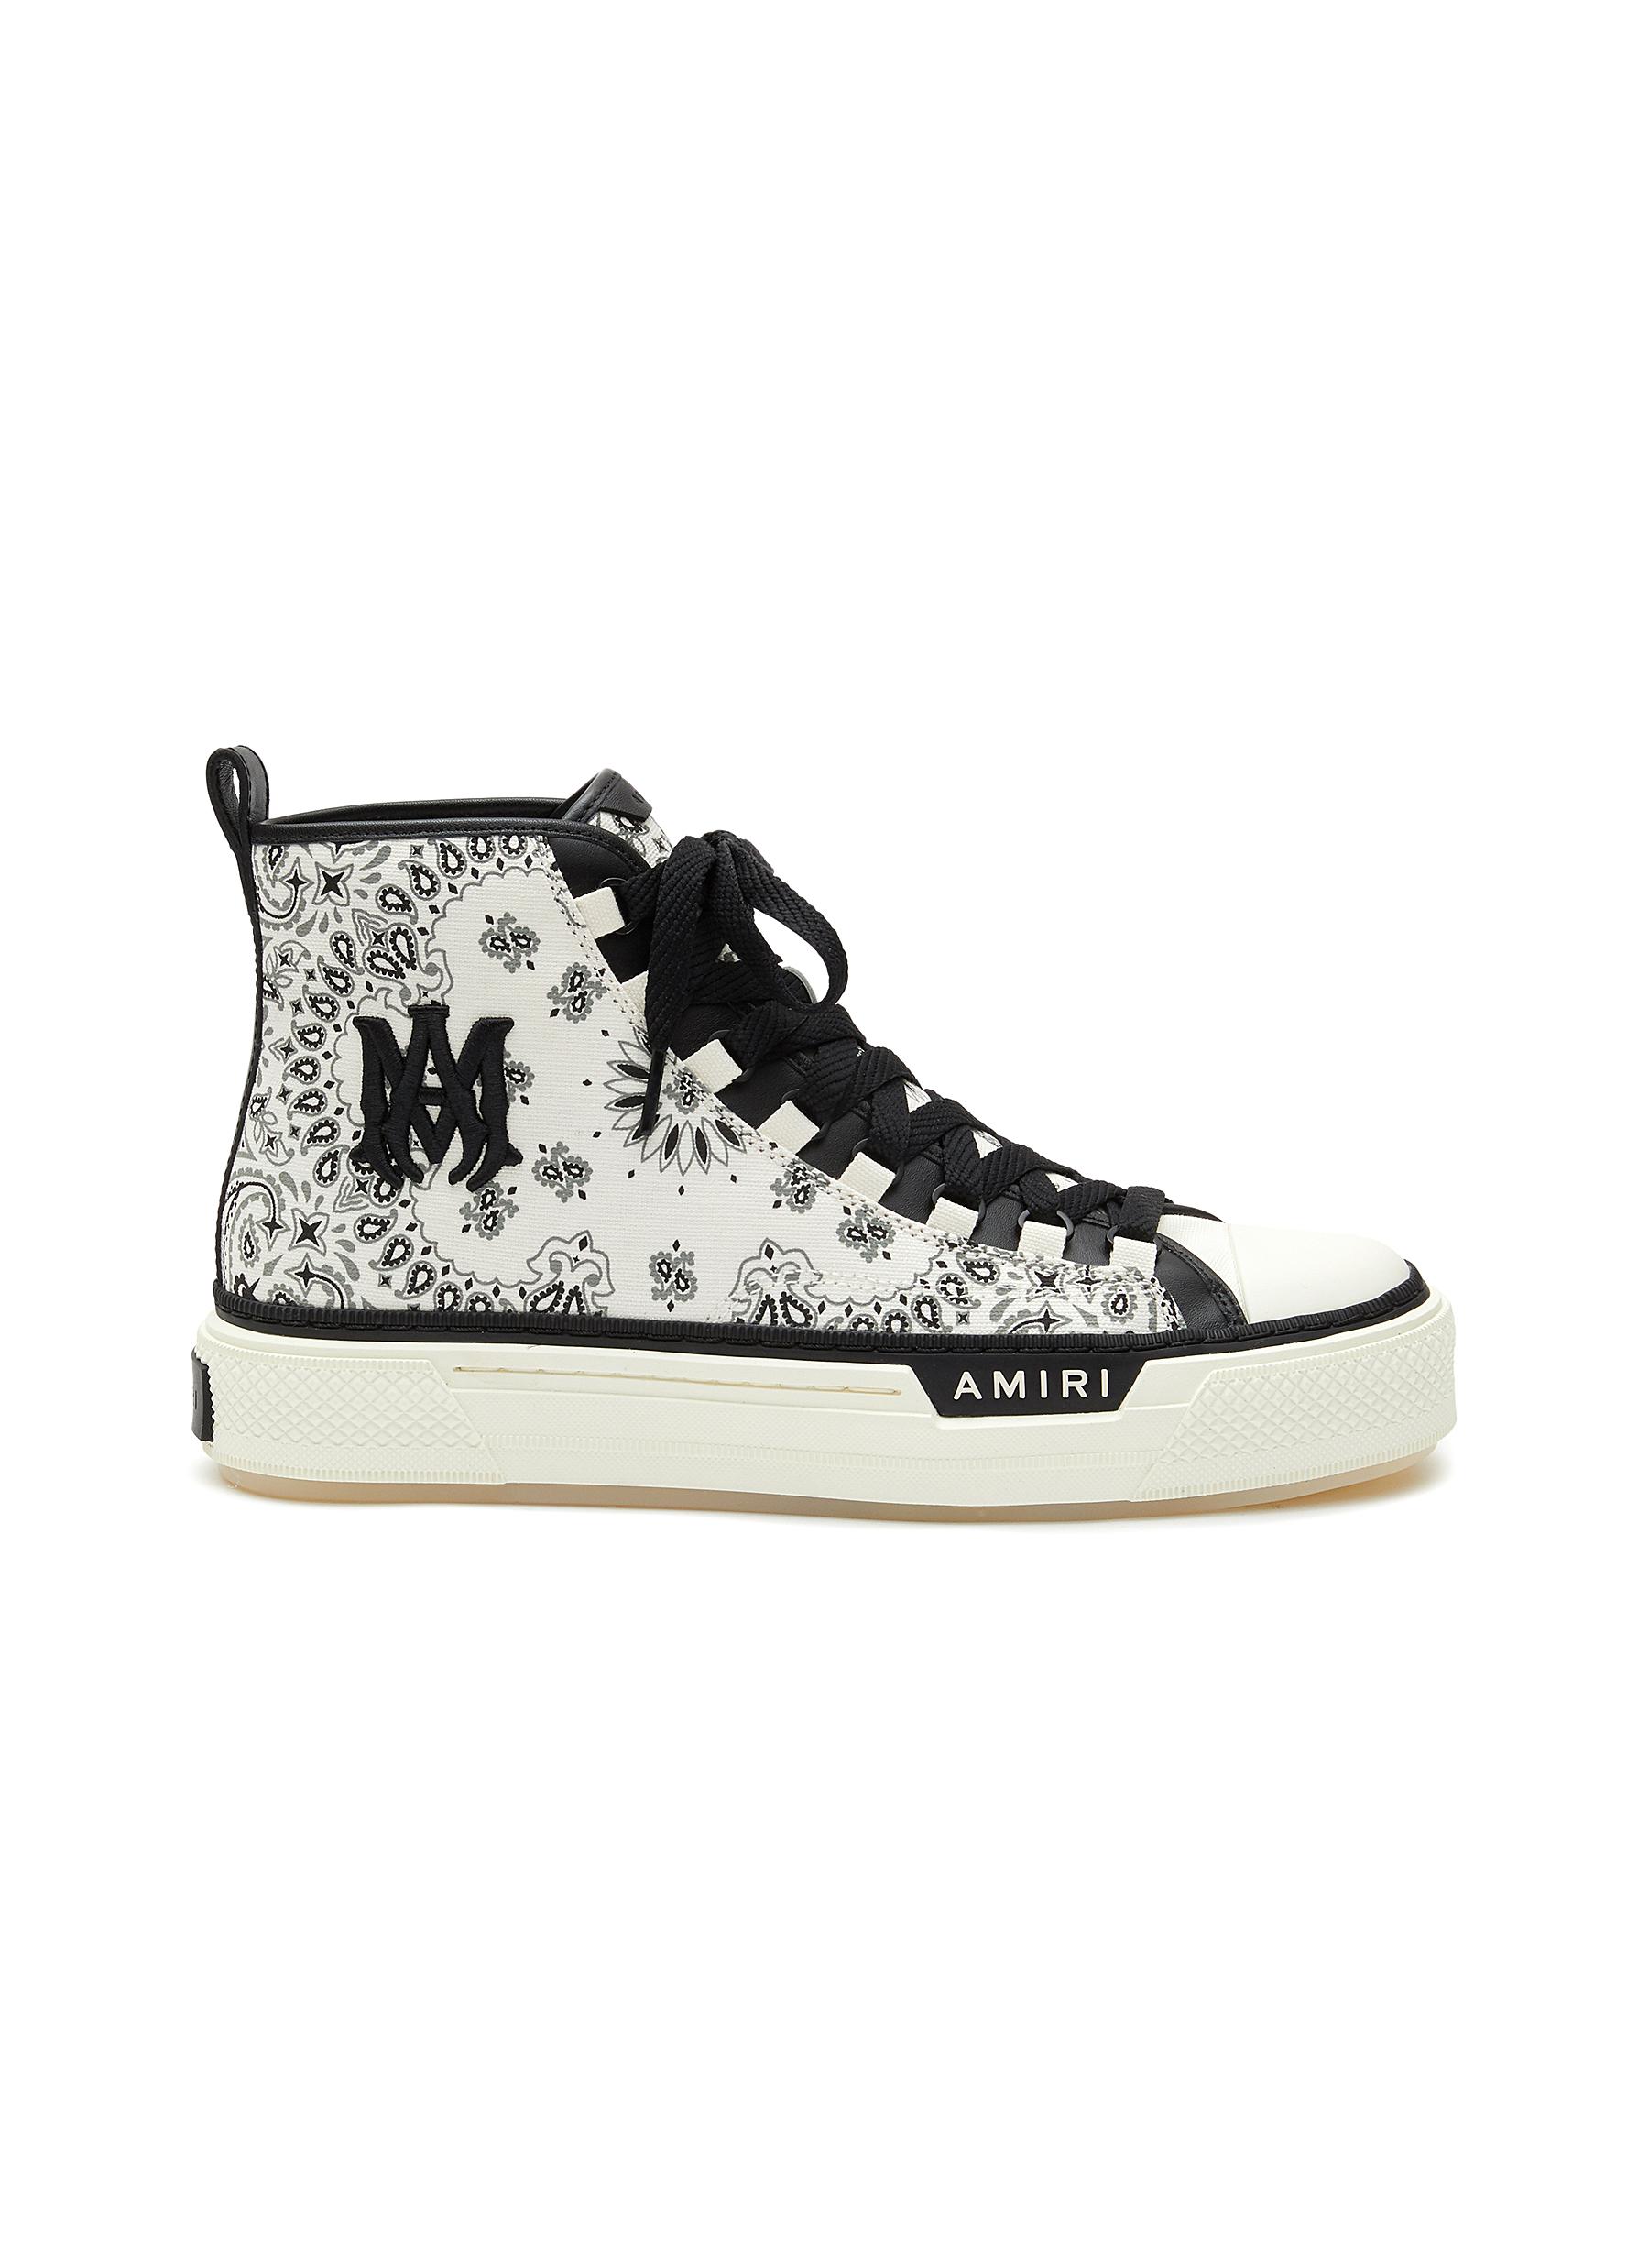 AMIRI ‘BANDANA' LOGO EMBROIDERED HIGH TOP LACE UP CANVAS SNEAKERS